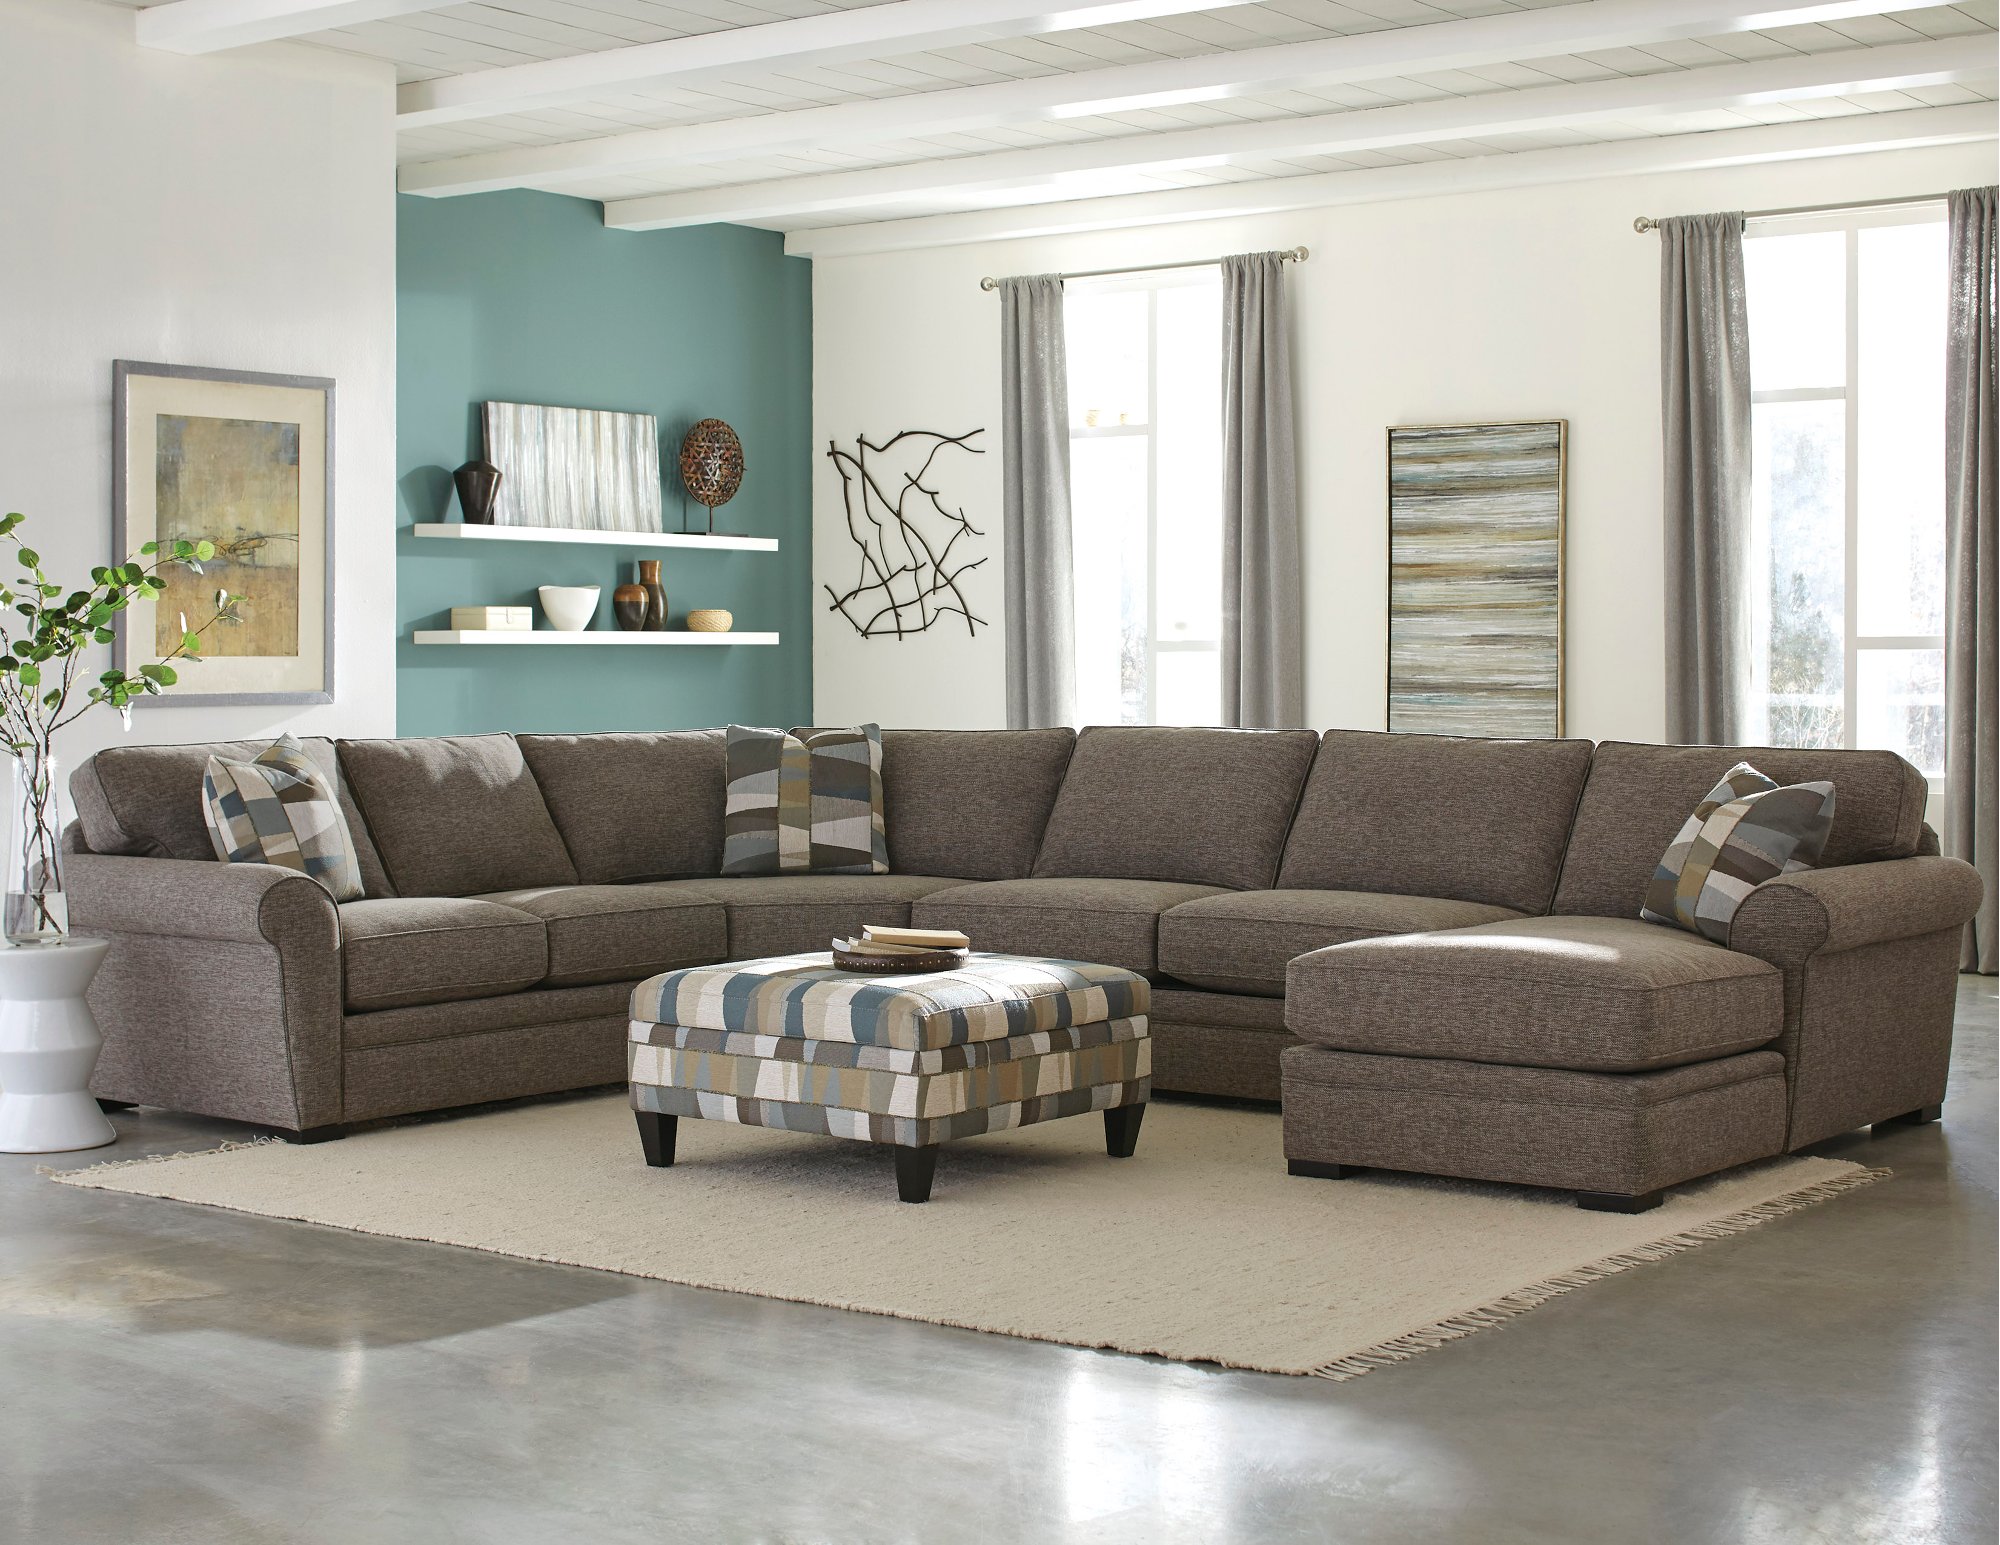 4 piece sectional sofa bed